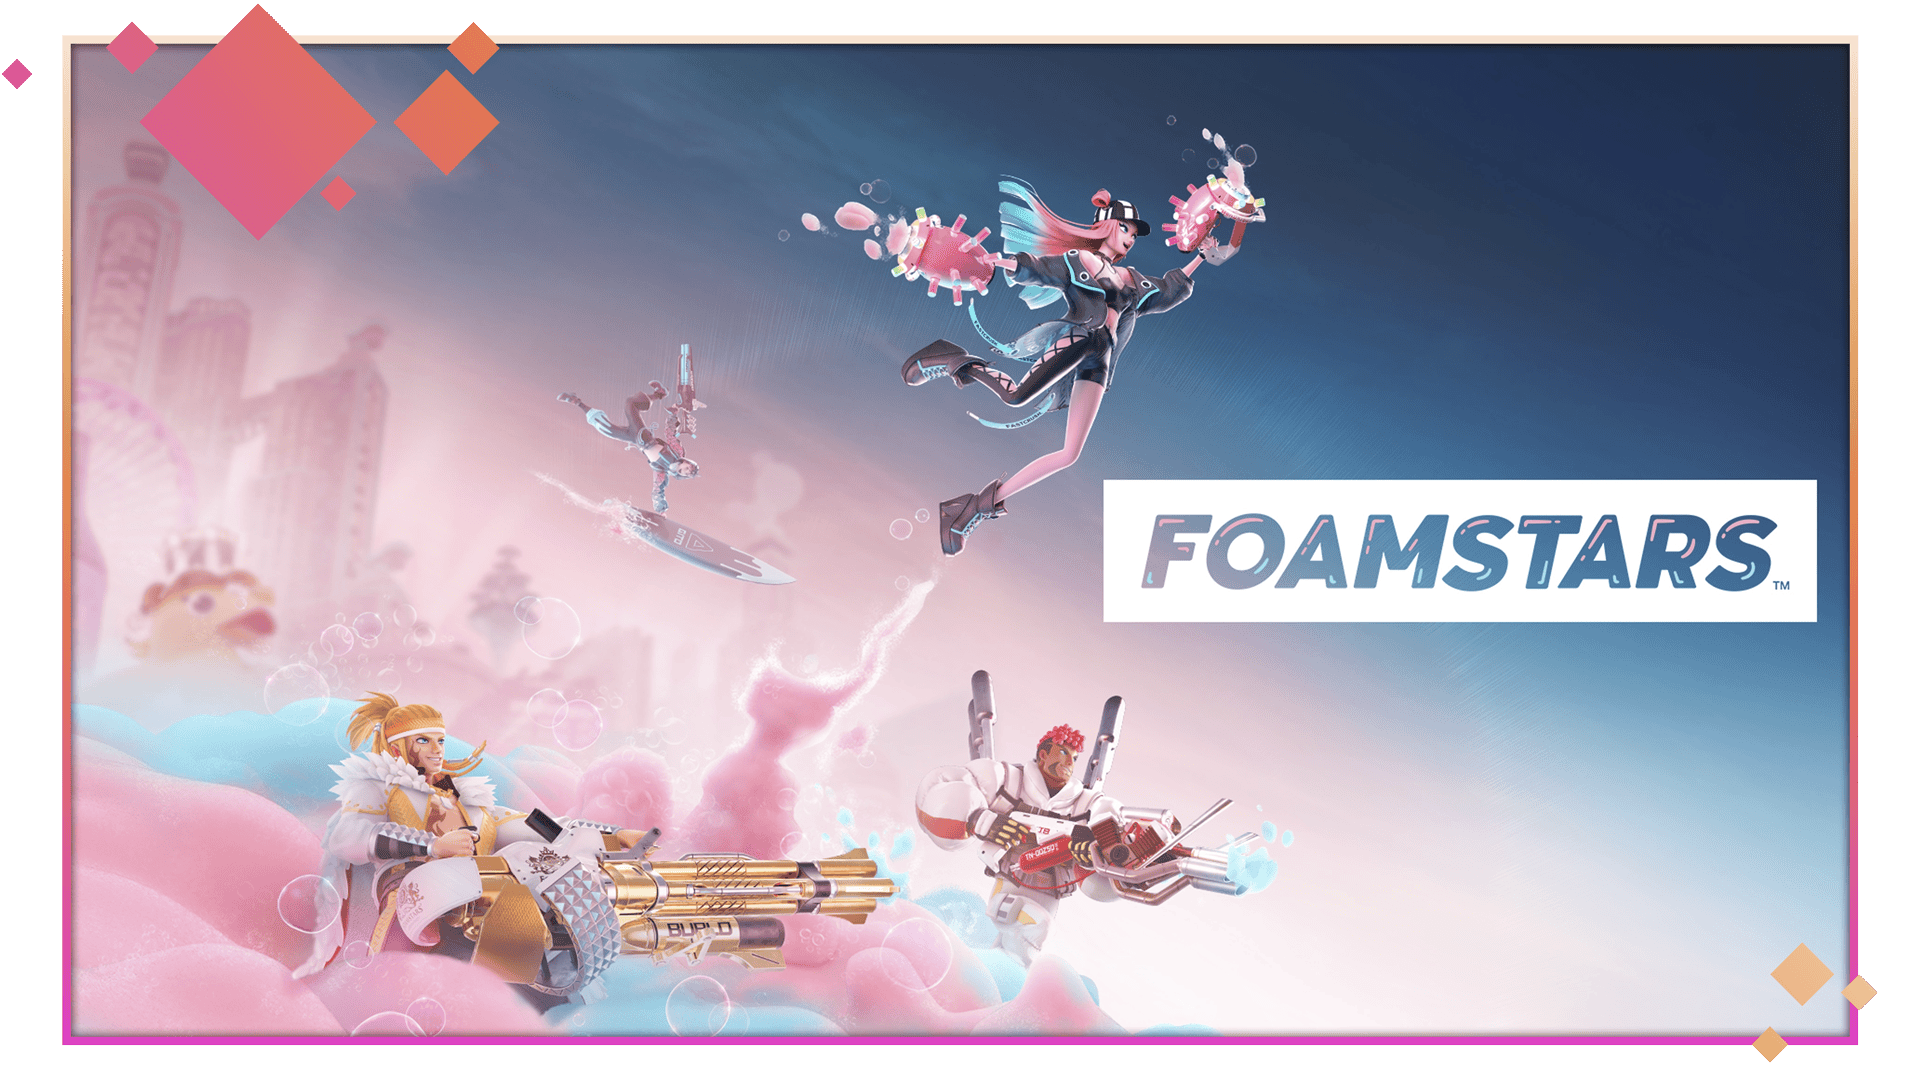 Foamstars - Announce Trailer | PS5 & PS4 Games